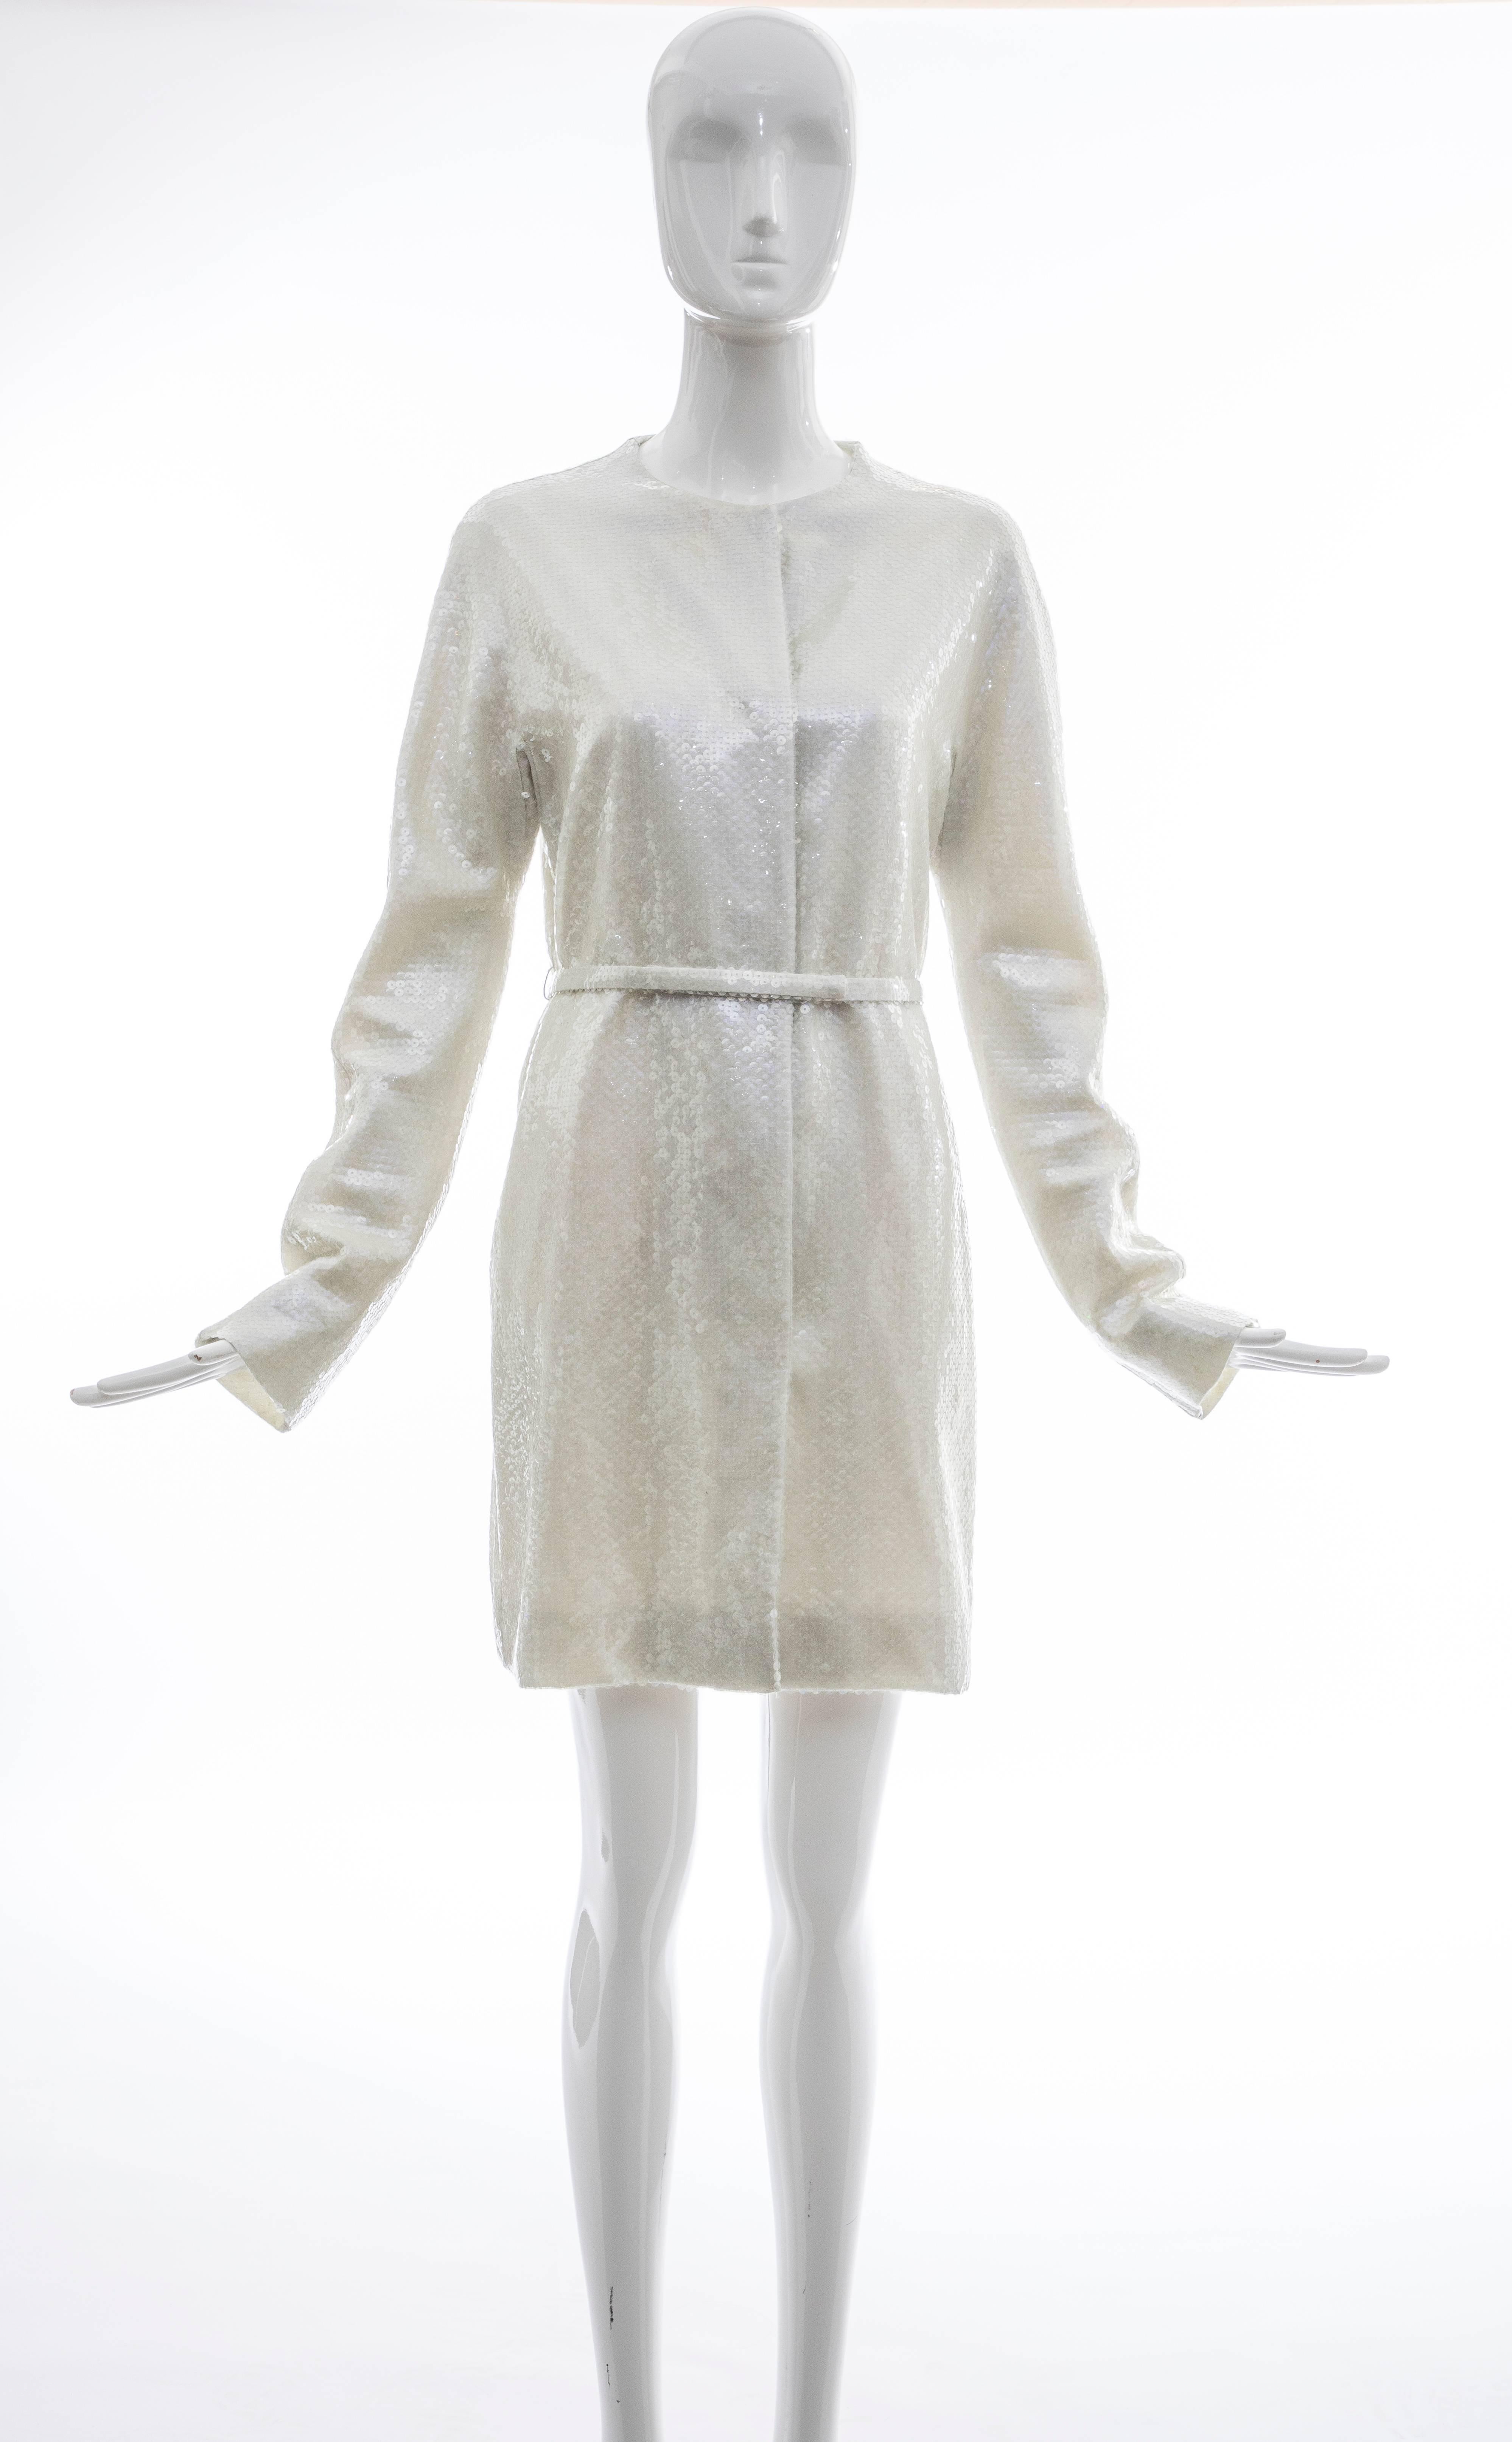 Raf Simons for Jil Sander, Spring 2007 runway (Look 46) pearlescent sequin button front evening lightweight coat with dual front pockets, self belt and fully lined in silk.

Bust 36, Waist 33, Hips 38, Length 35, Shoulder 16, Sleeve 37

EU. 38
US. 6